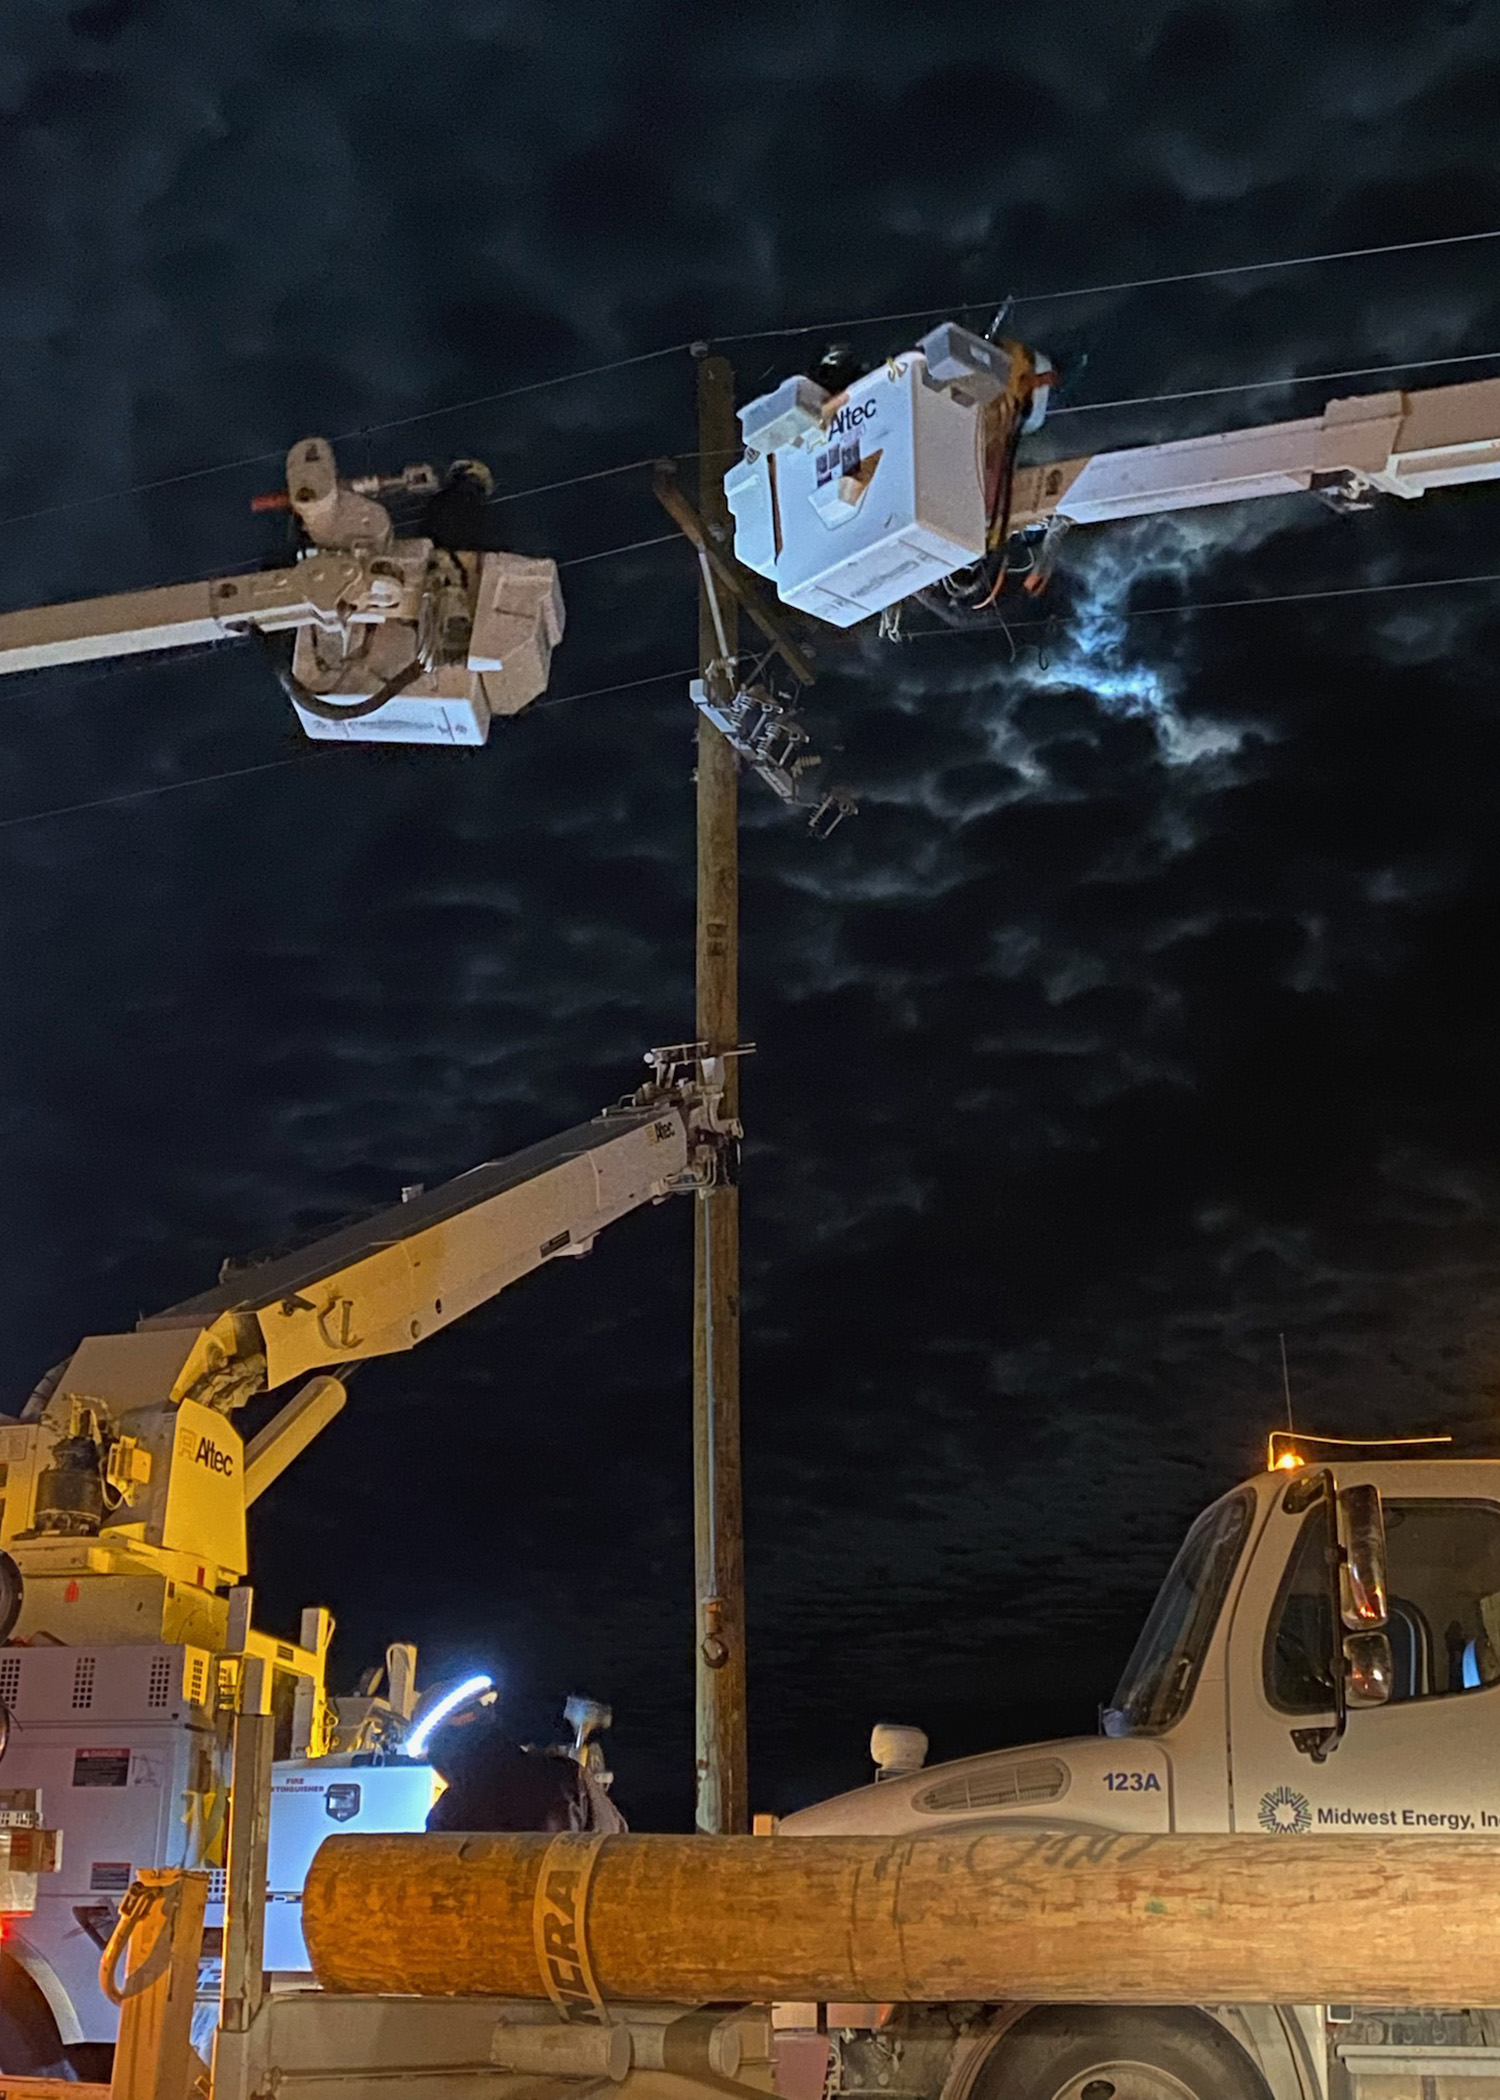 A picture of linemen in two bucket trucks working on a power pole at night.